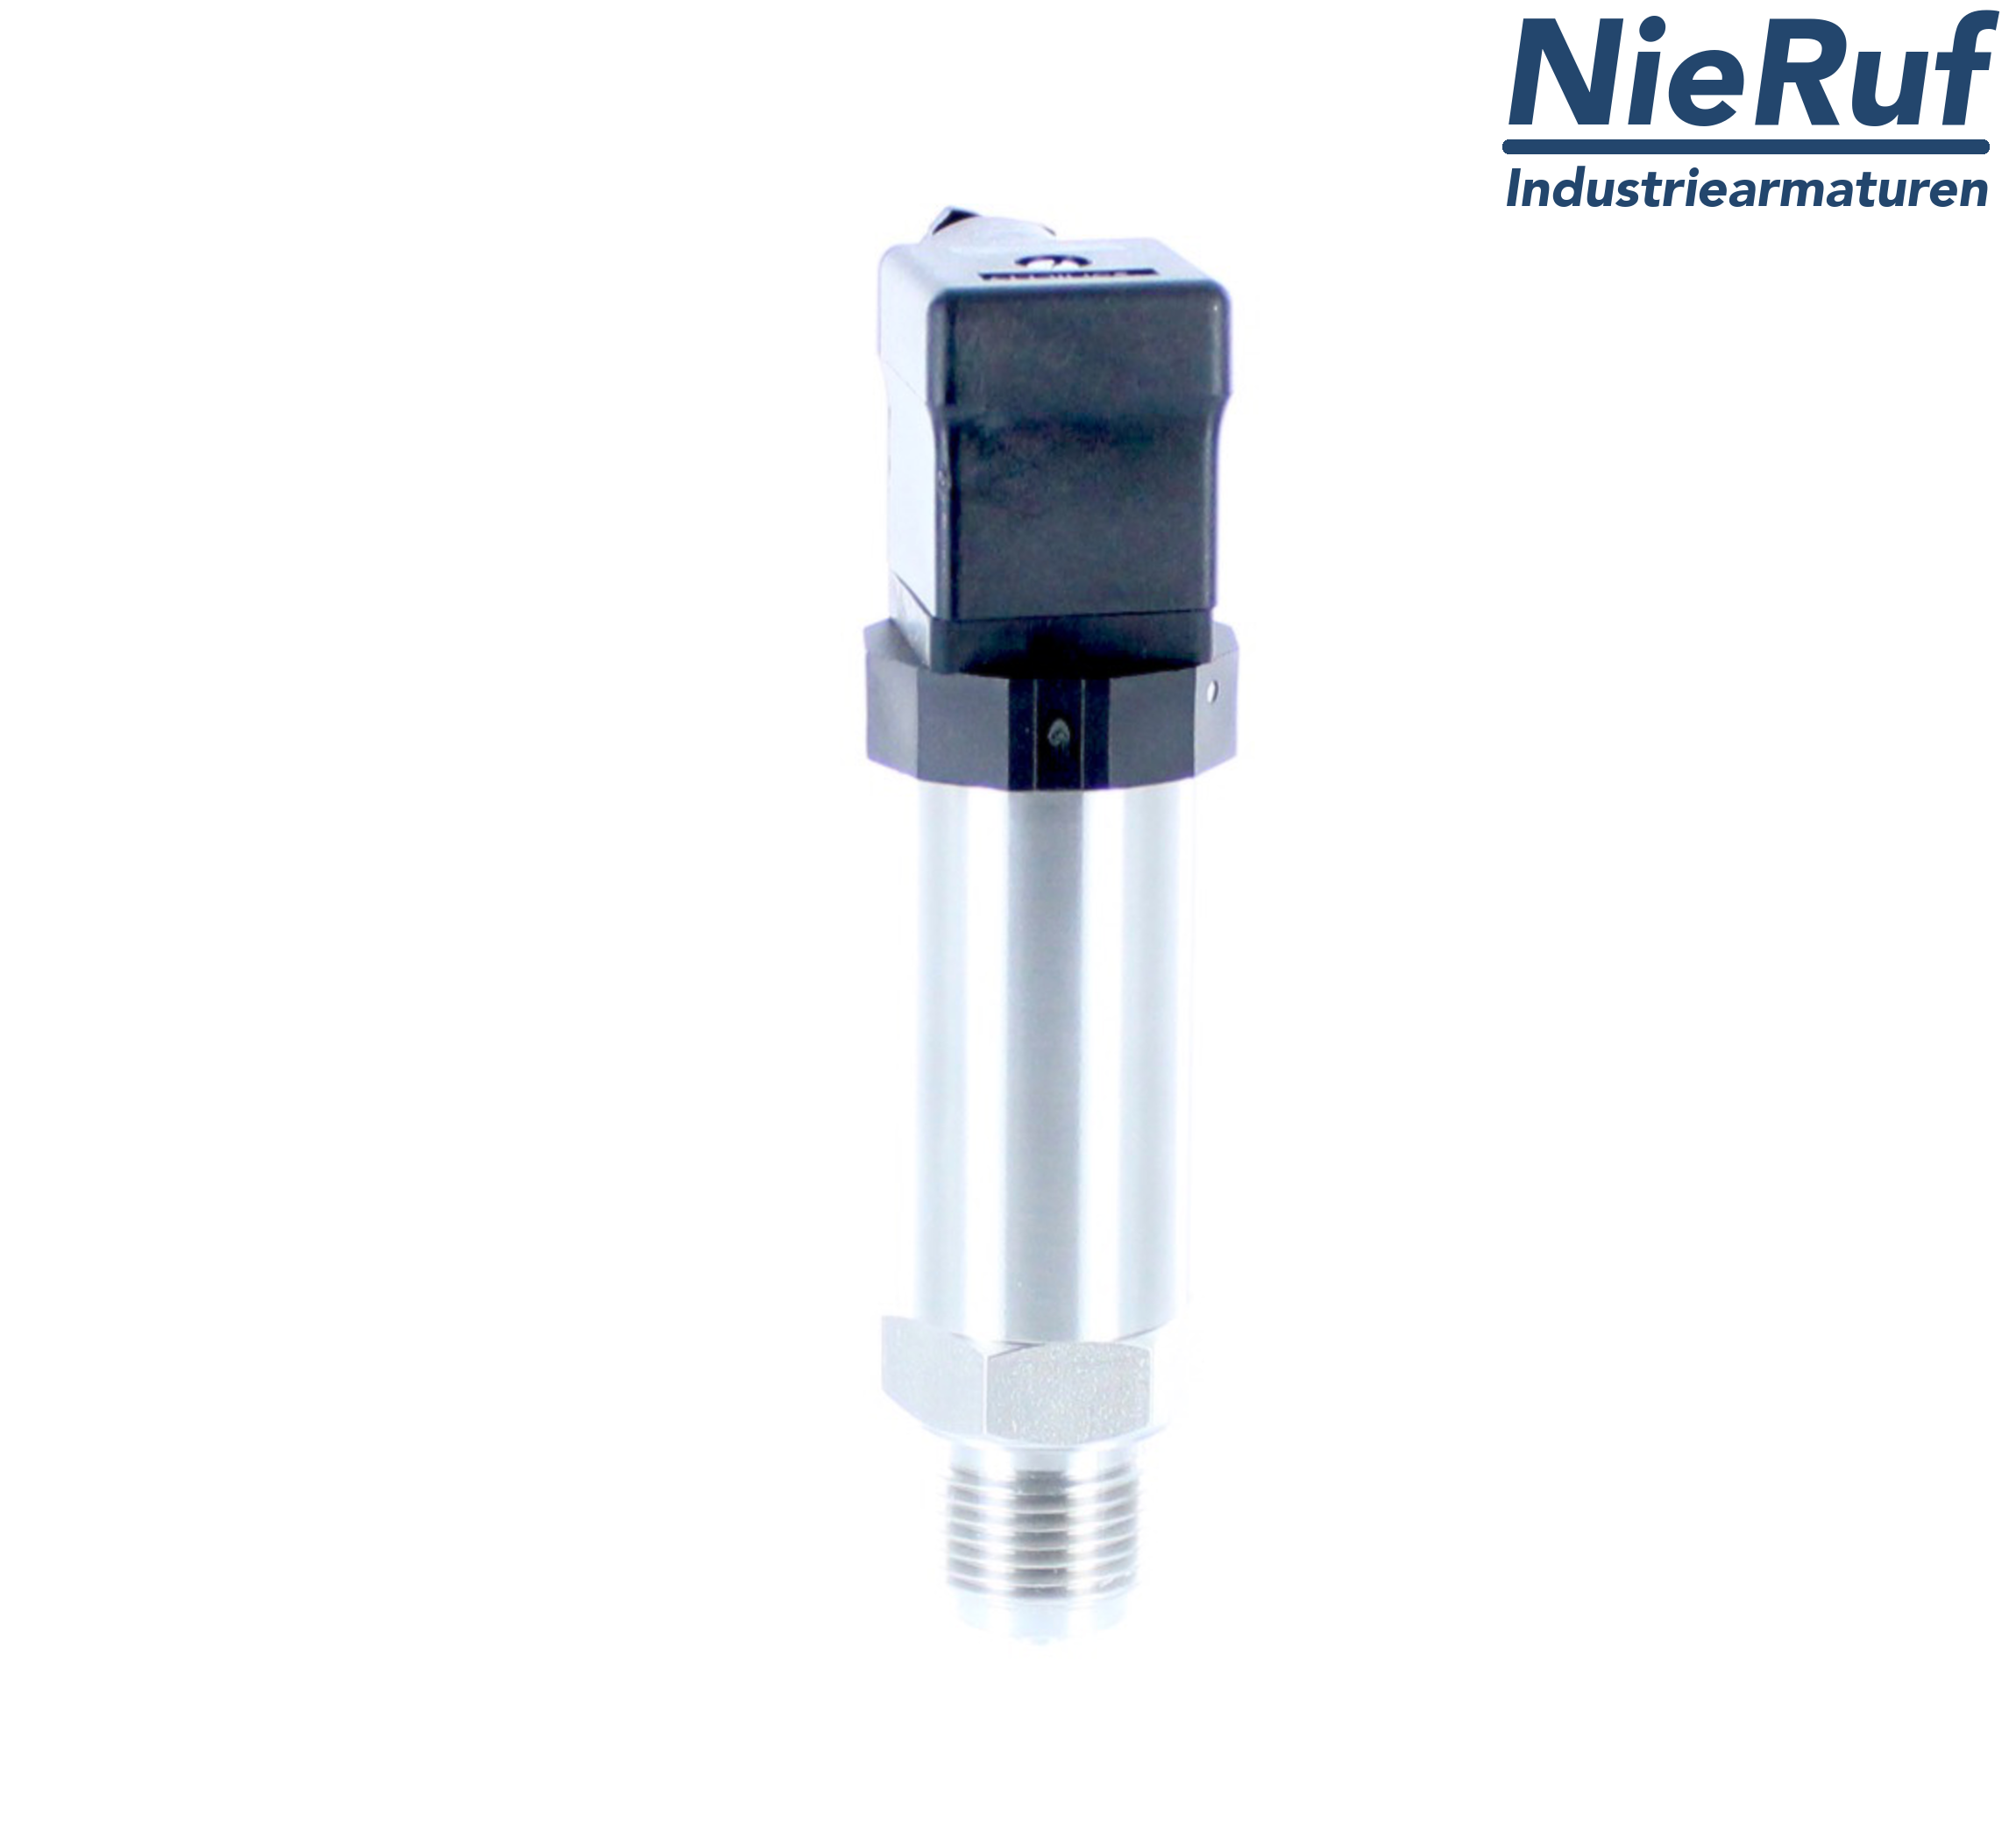 pressure sensor G 1/2" B DS01 stainless steel 2-wire: 4-20mA FPM 0,0 - 320,0 bar